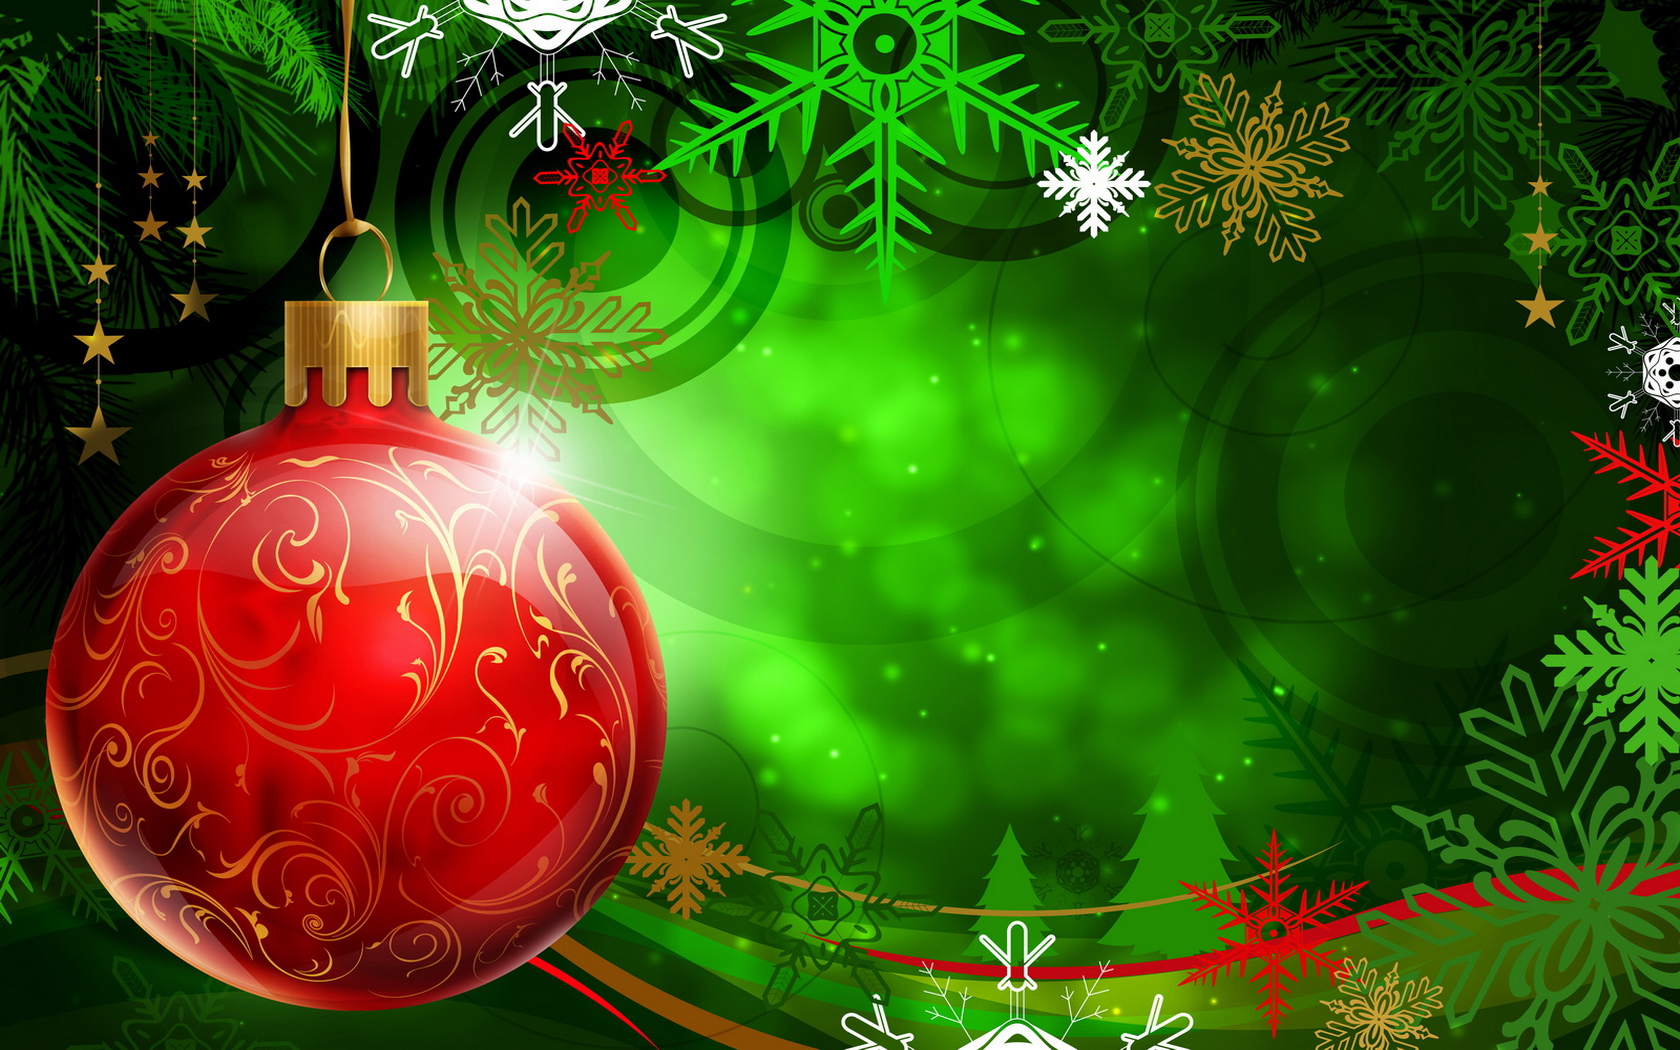  wallpaper android live christmas wallpaper android Desktop 1680x1050